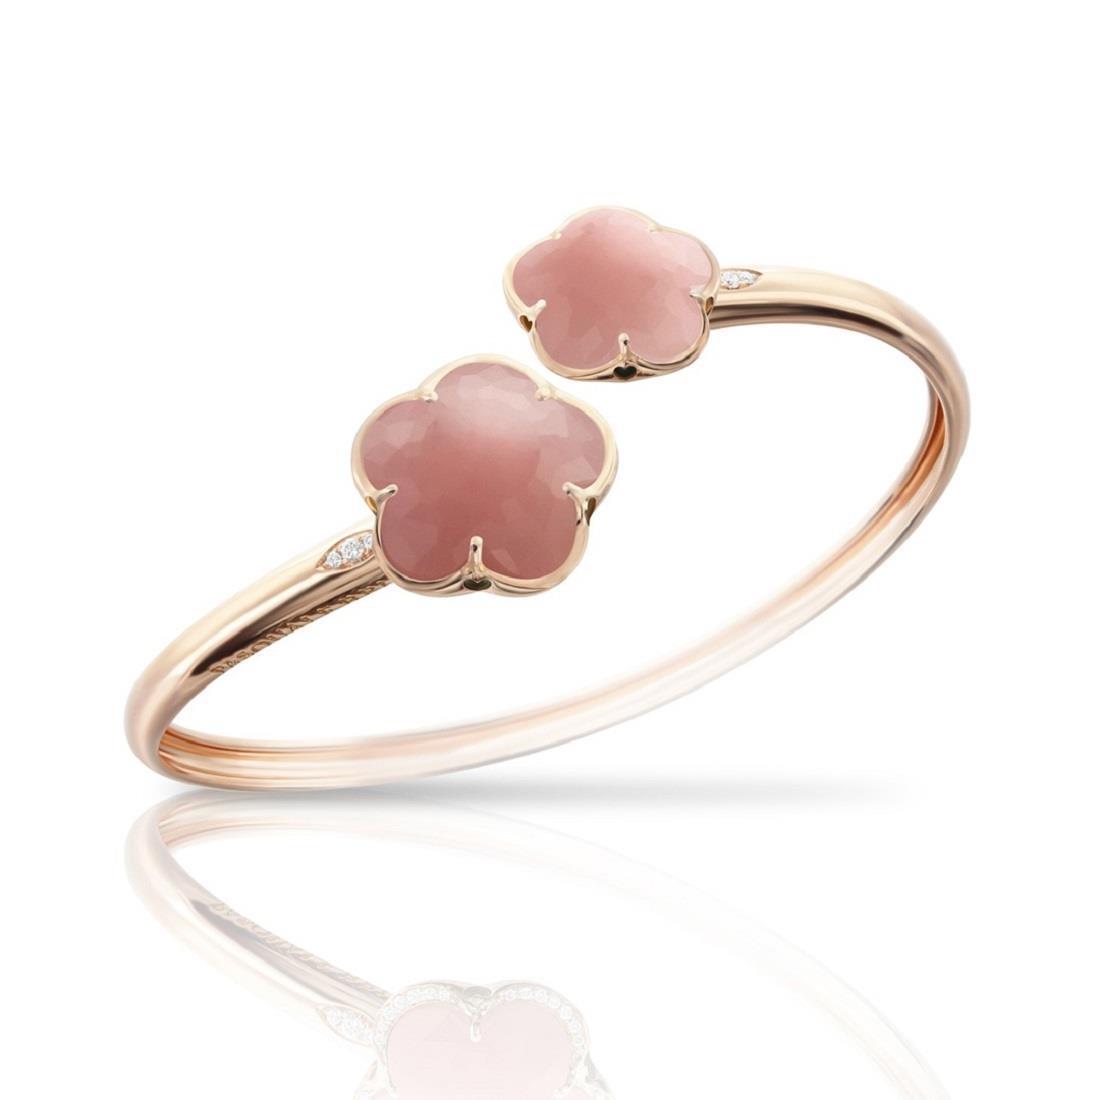 Bon Ton rigid bracelet in red gold with pink chalcedony and diamonds - PASQUALE BRUNI